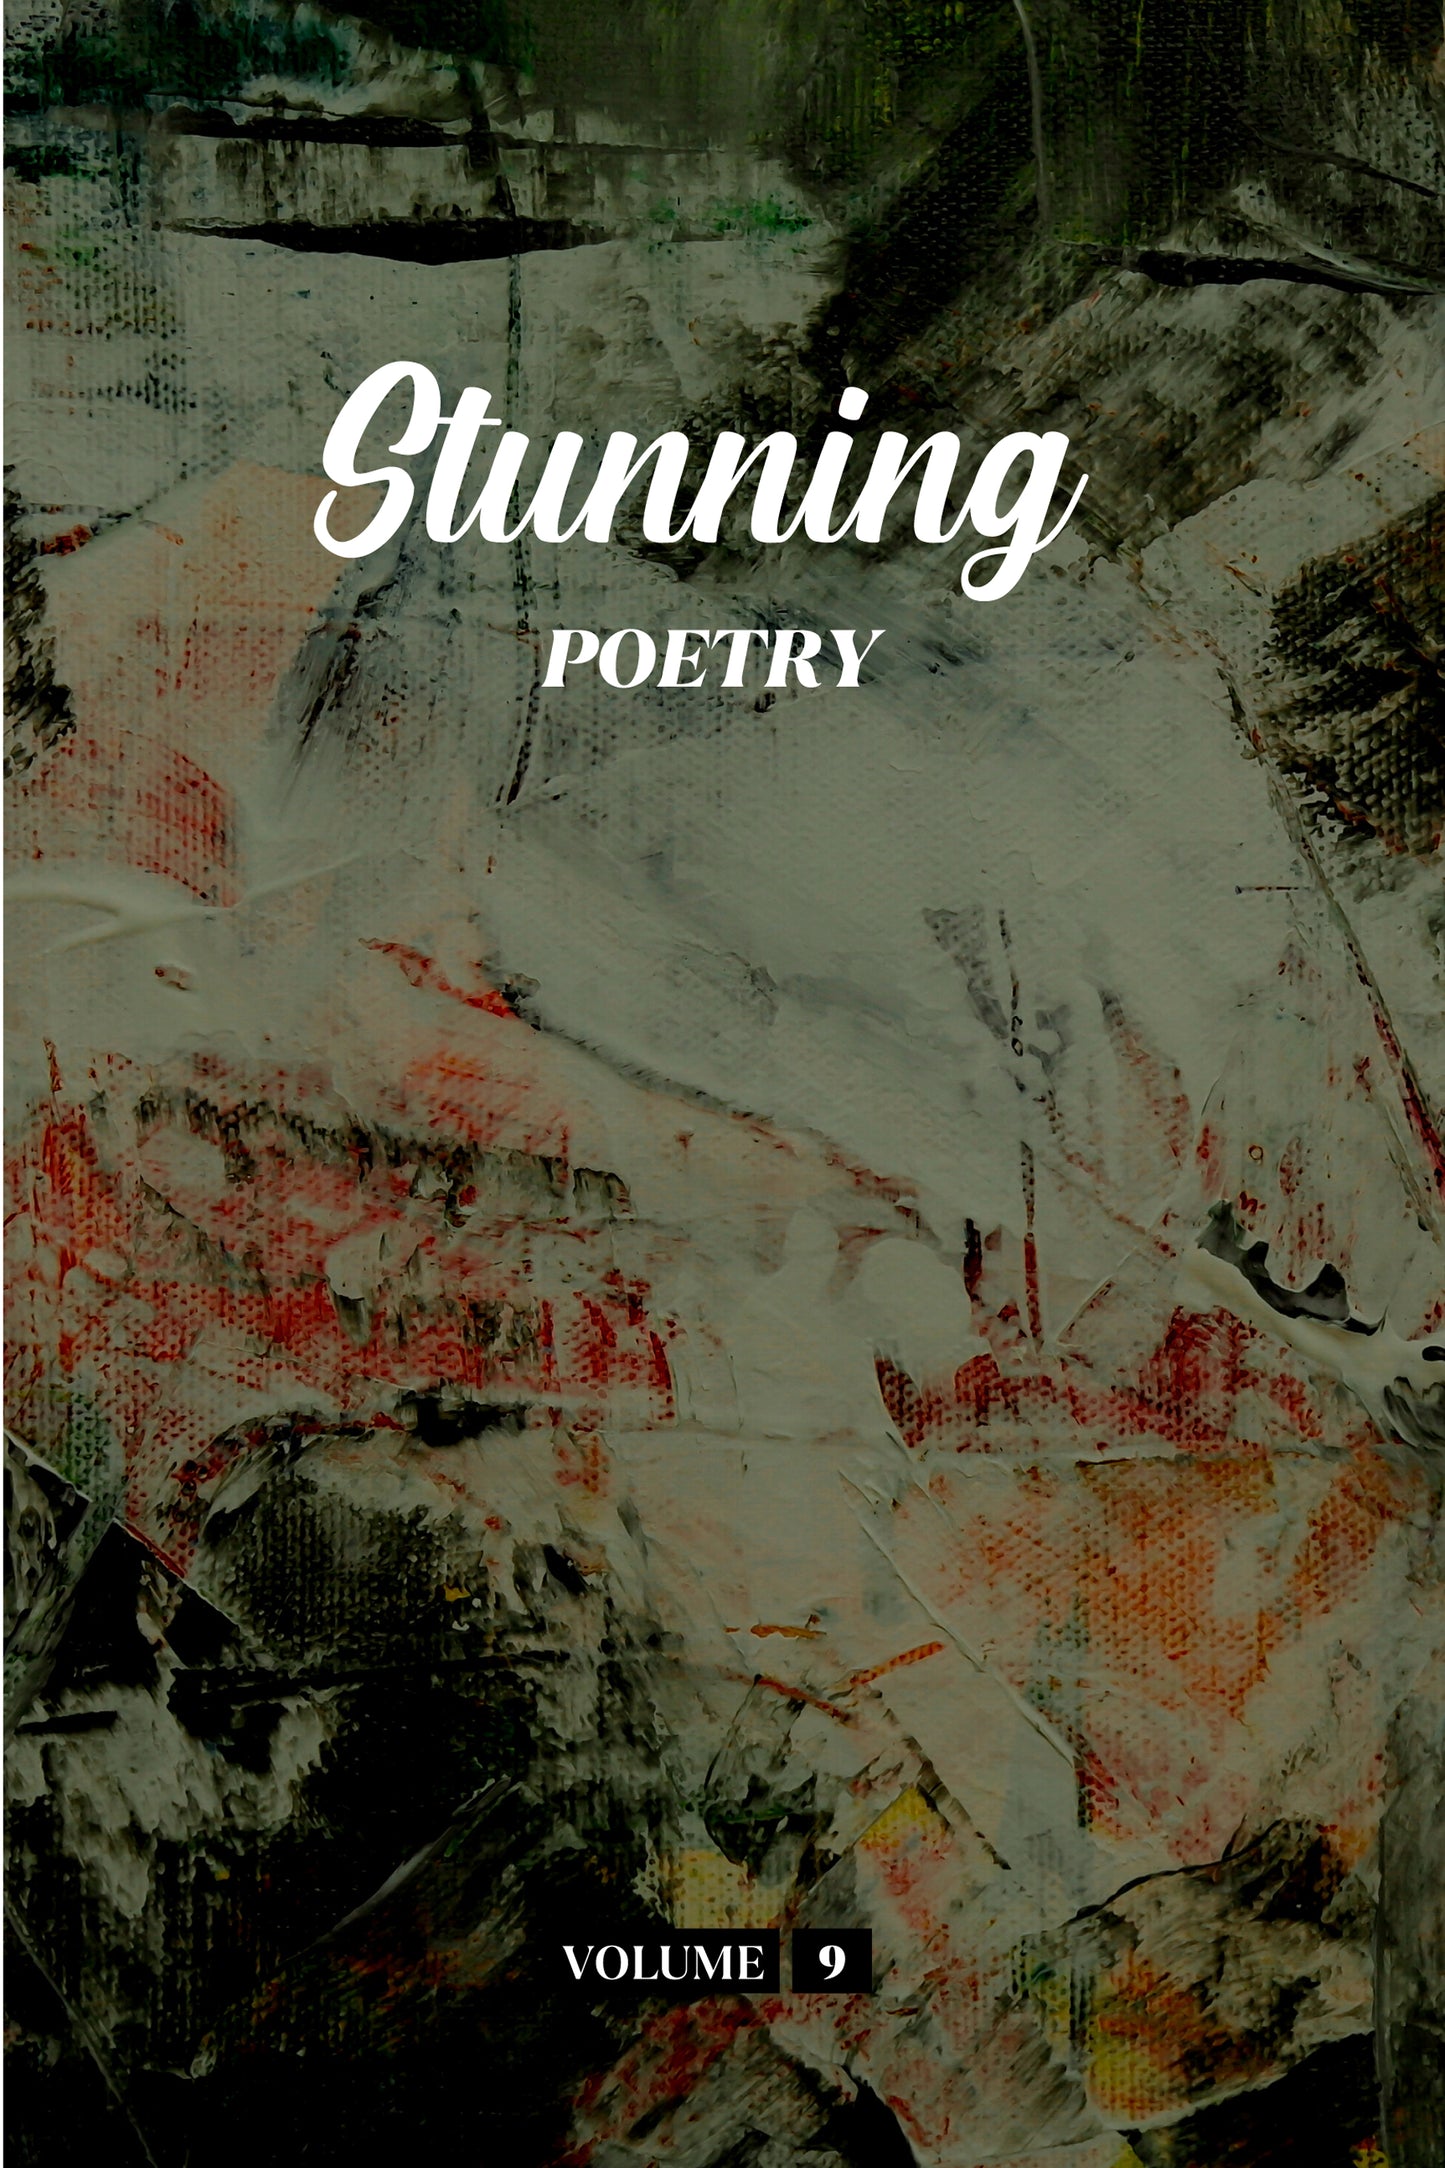 Stunning Poetry (Volume 9) - Physical Book (Pre-Order)